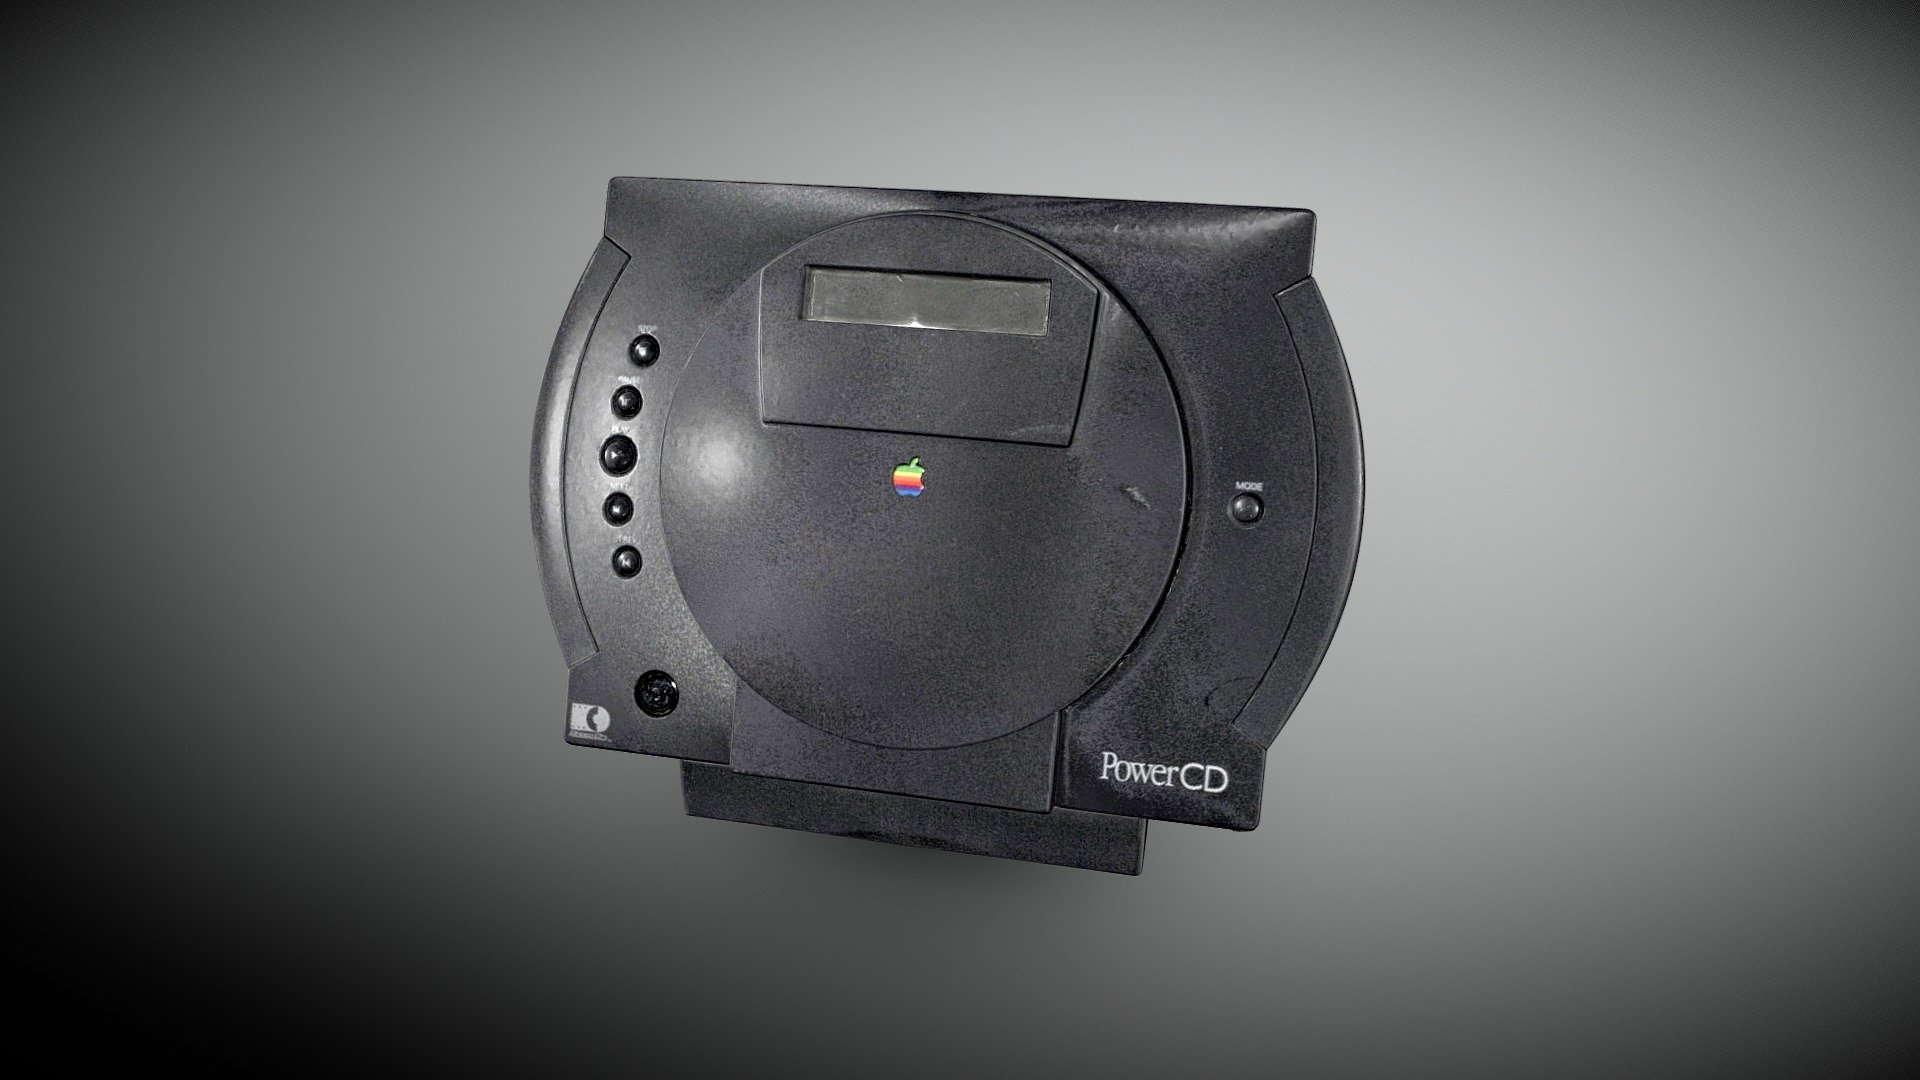 Apple PowerCD is a CD player sold by Apple Computer in 1993 and discontinued several years later. It was a re-badged Philips-designed product (Philips CDF-100) which was sold in addition to Apple's speakers and also included a remote control. The PowerCD was capable of reading Kodak photo CDs, data CDs and audio CDs. It can connect to Macintosh personal computers through SCSI and also to stereo systems and televisions.

https://en.wikipedia.org/wiki/PowerCD

Structured-Light scan - Apple Power CD - Download Free 3D model by Moshe Caine (@moshecaine) 3d model